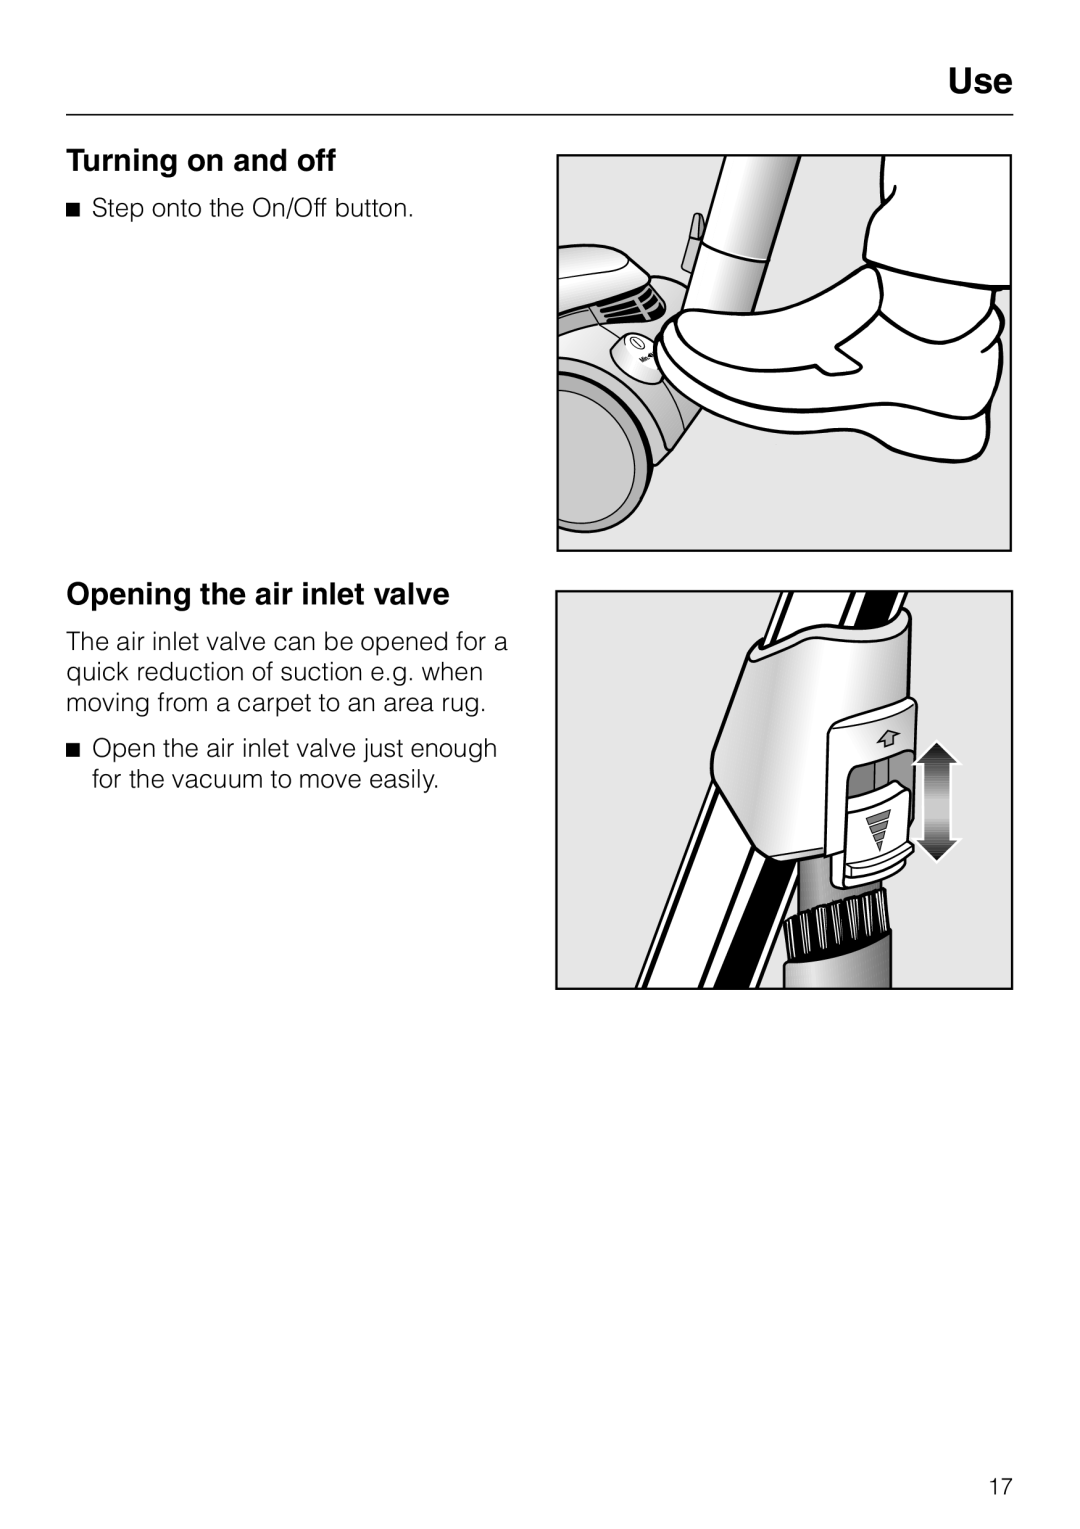 Miele HS09 operating instructions Turning on and off, Opening the air inlet valve 